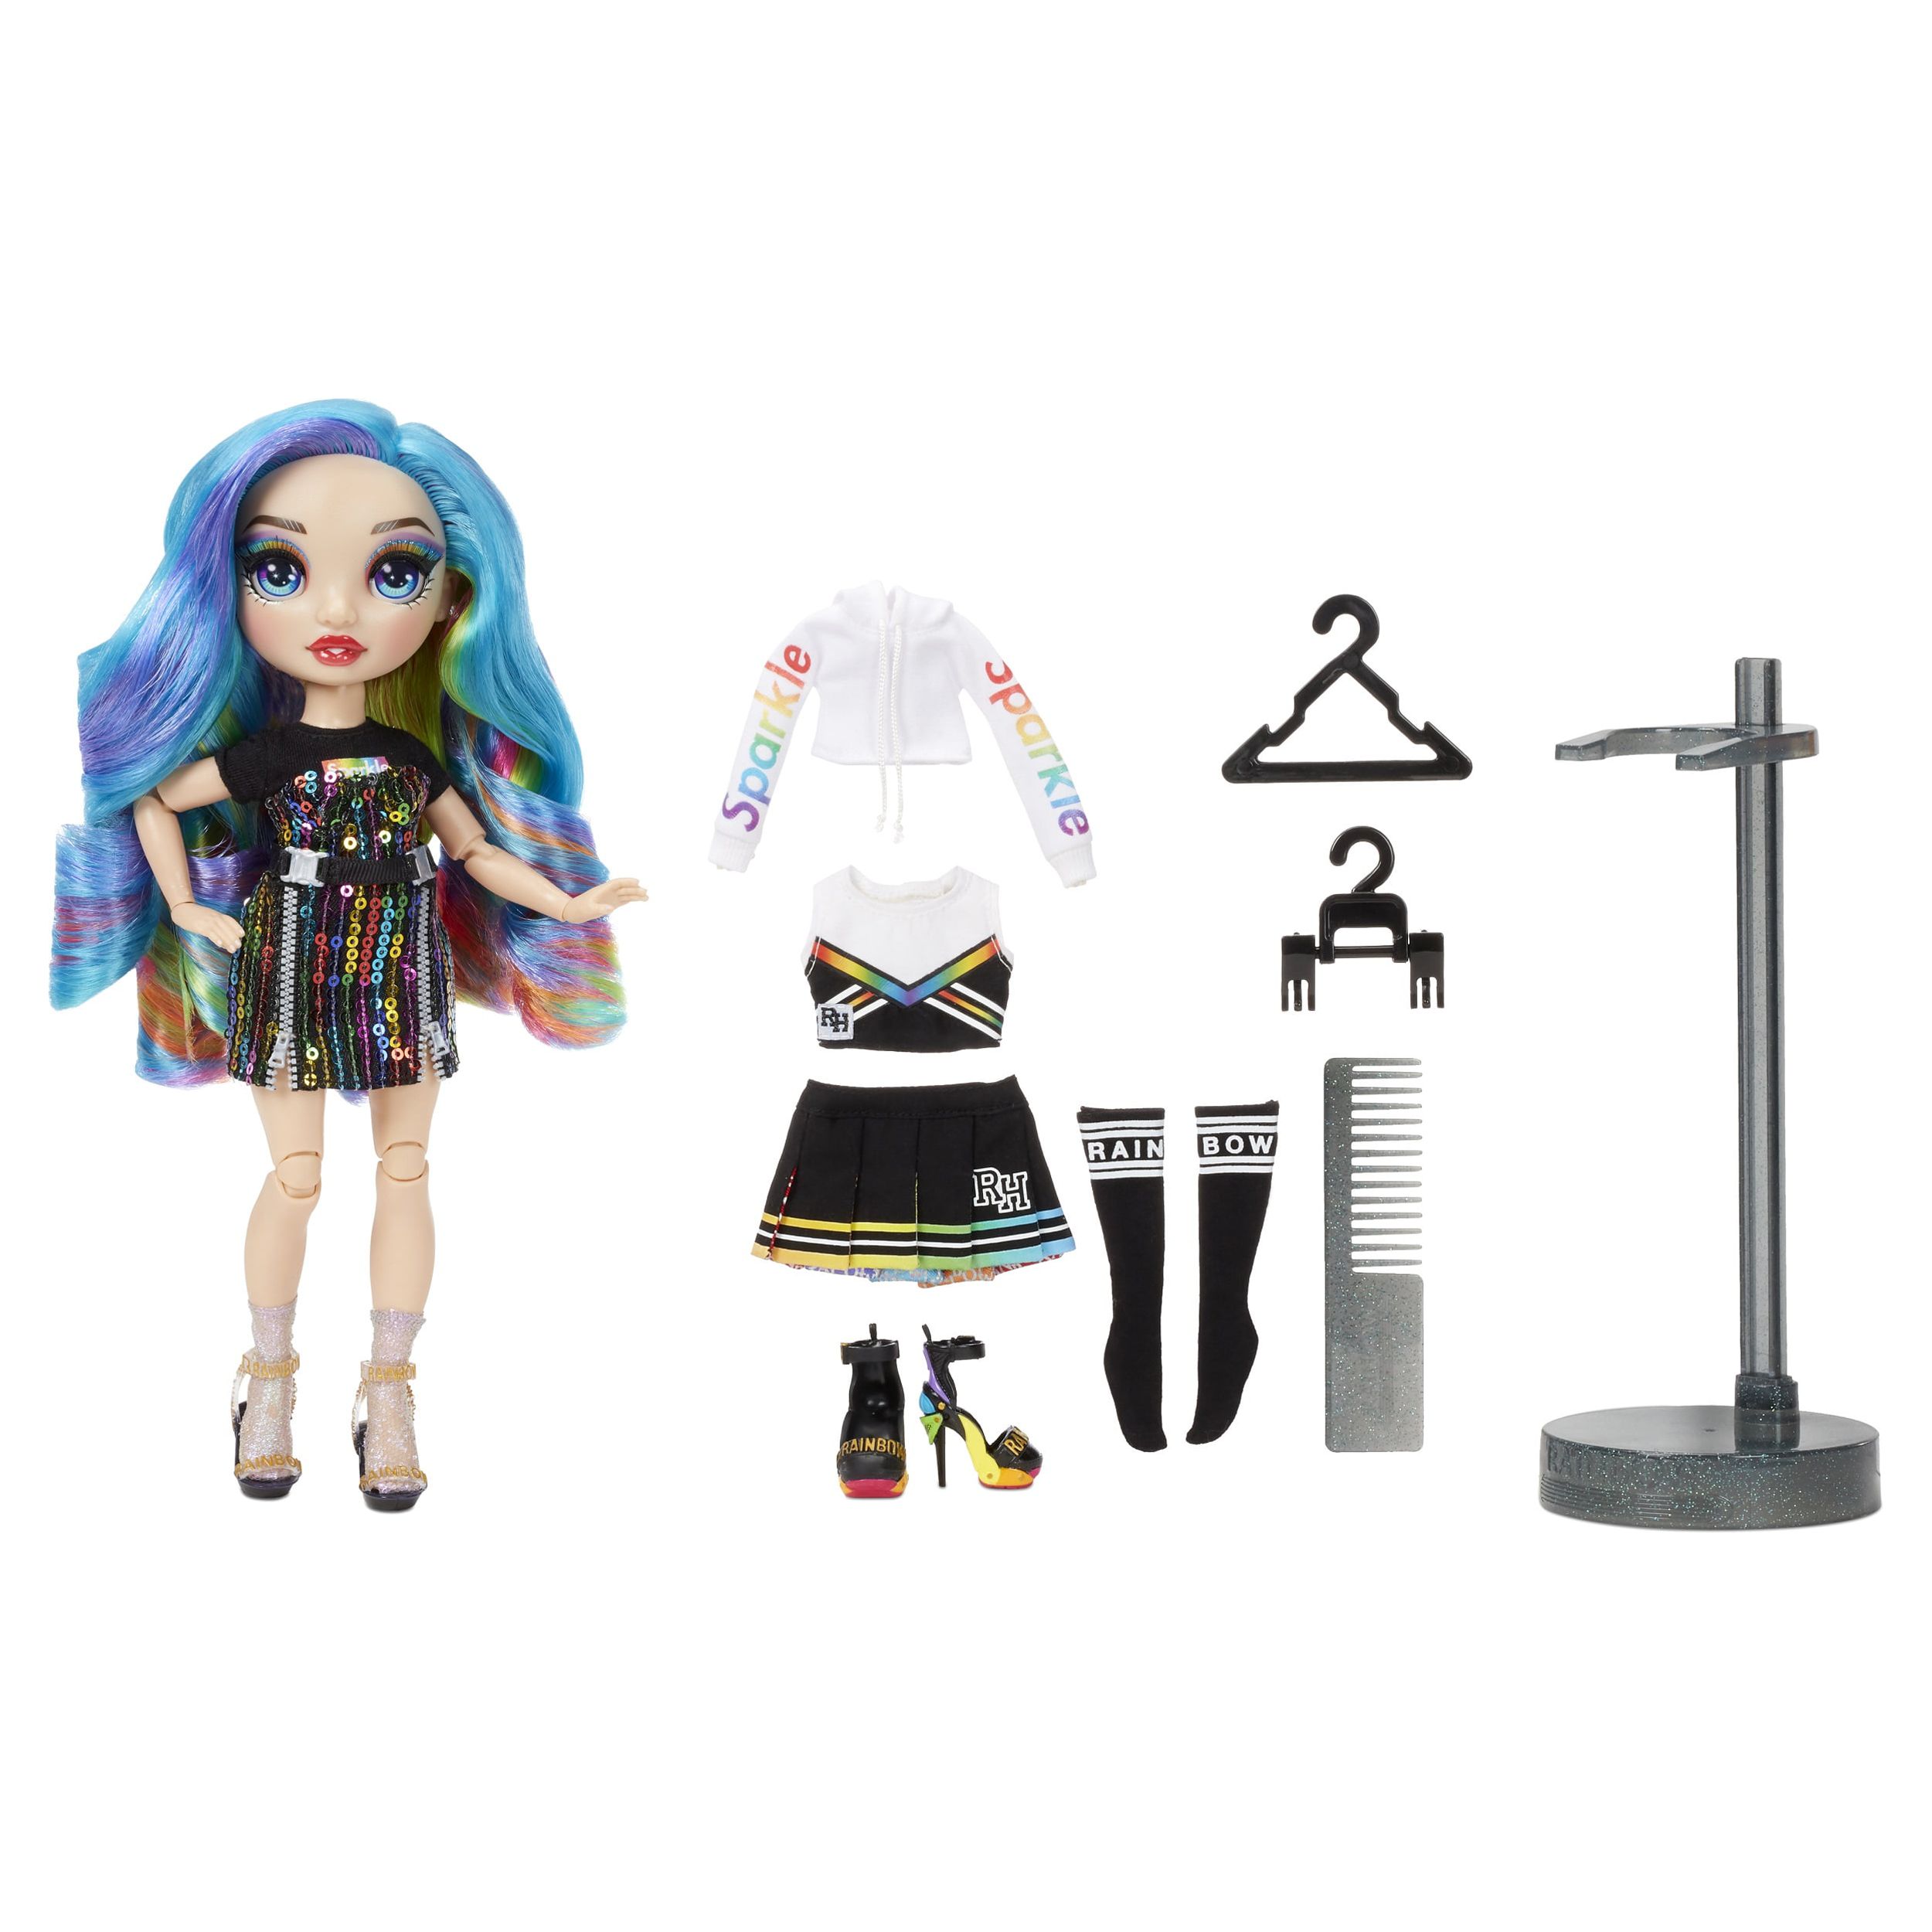 Rainbow High Amaya Raine – Rainbow Fashion Doll with 2 Complete Mix & Match Outfits and Accessories, Toys for Kids 6-12 Years Old - image 4 of 8